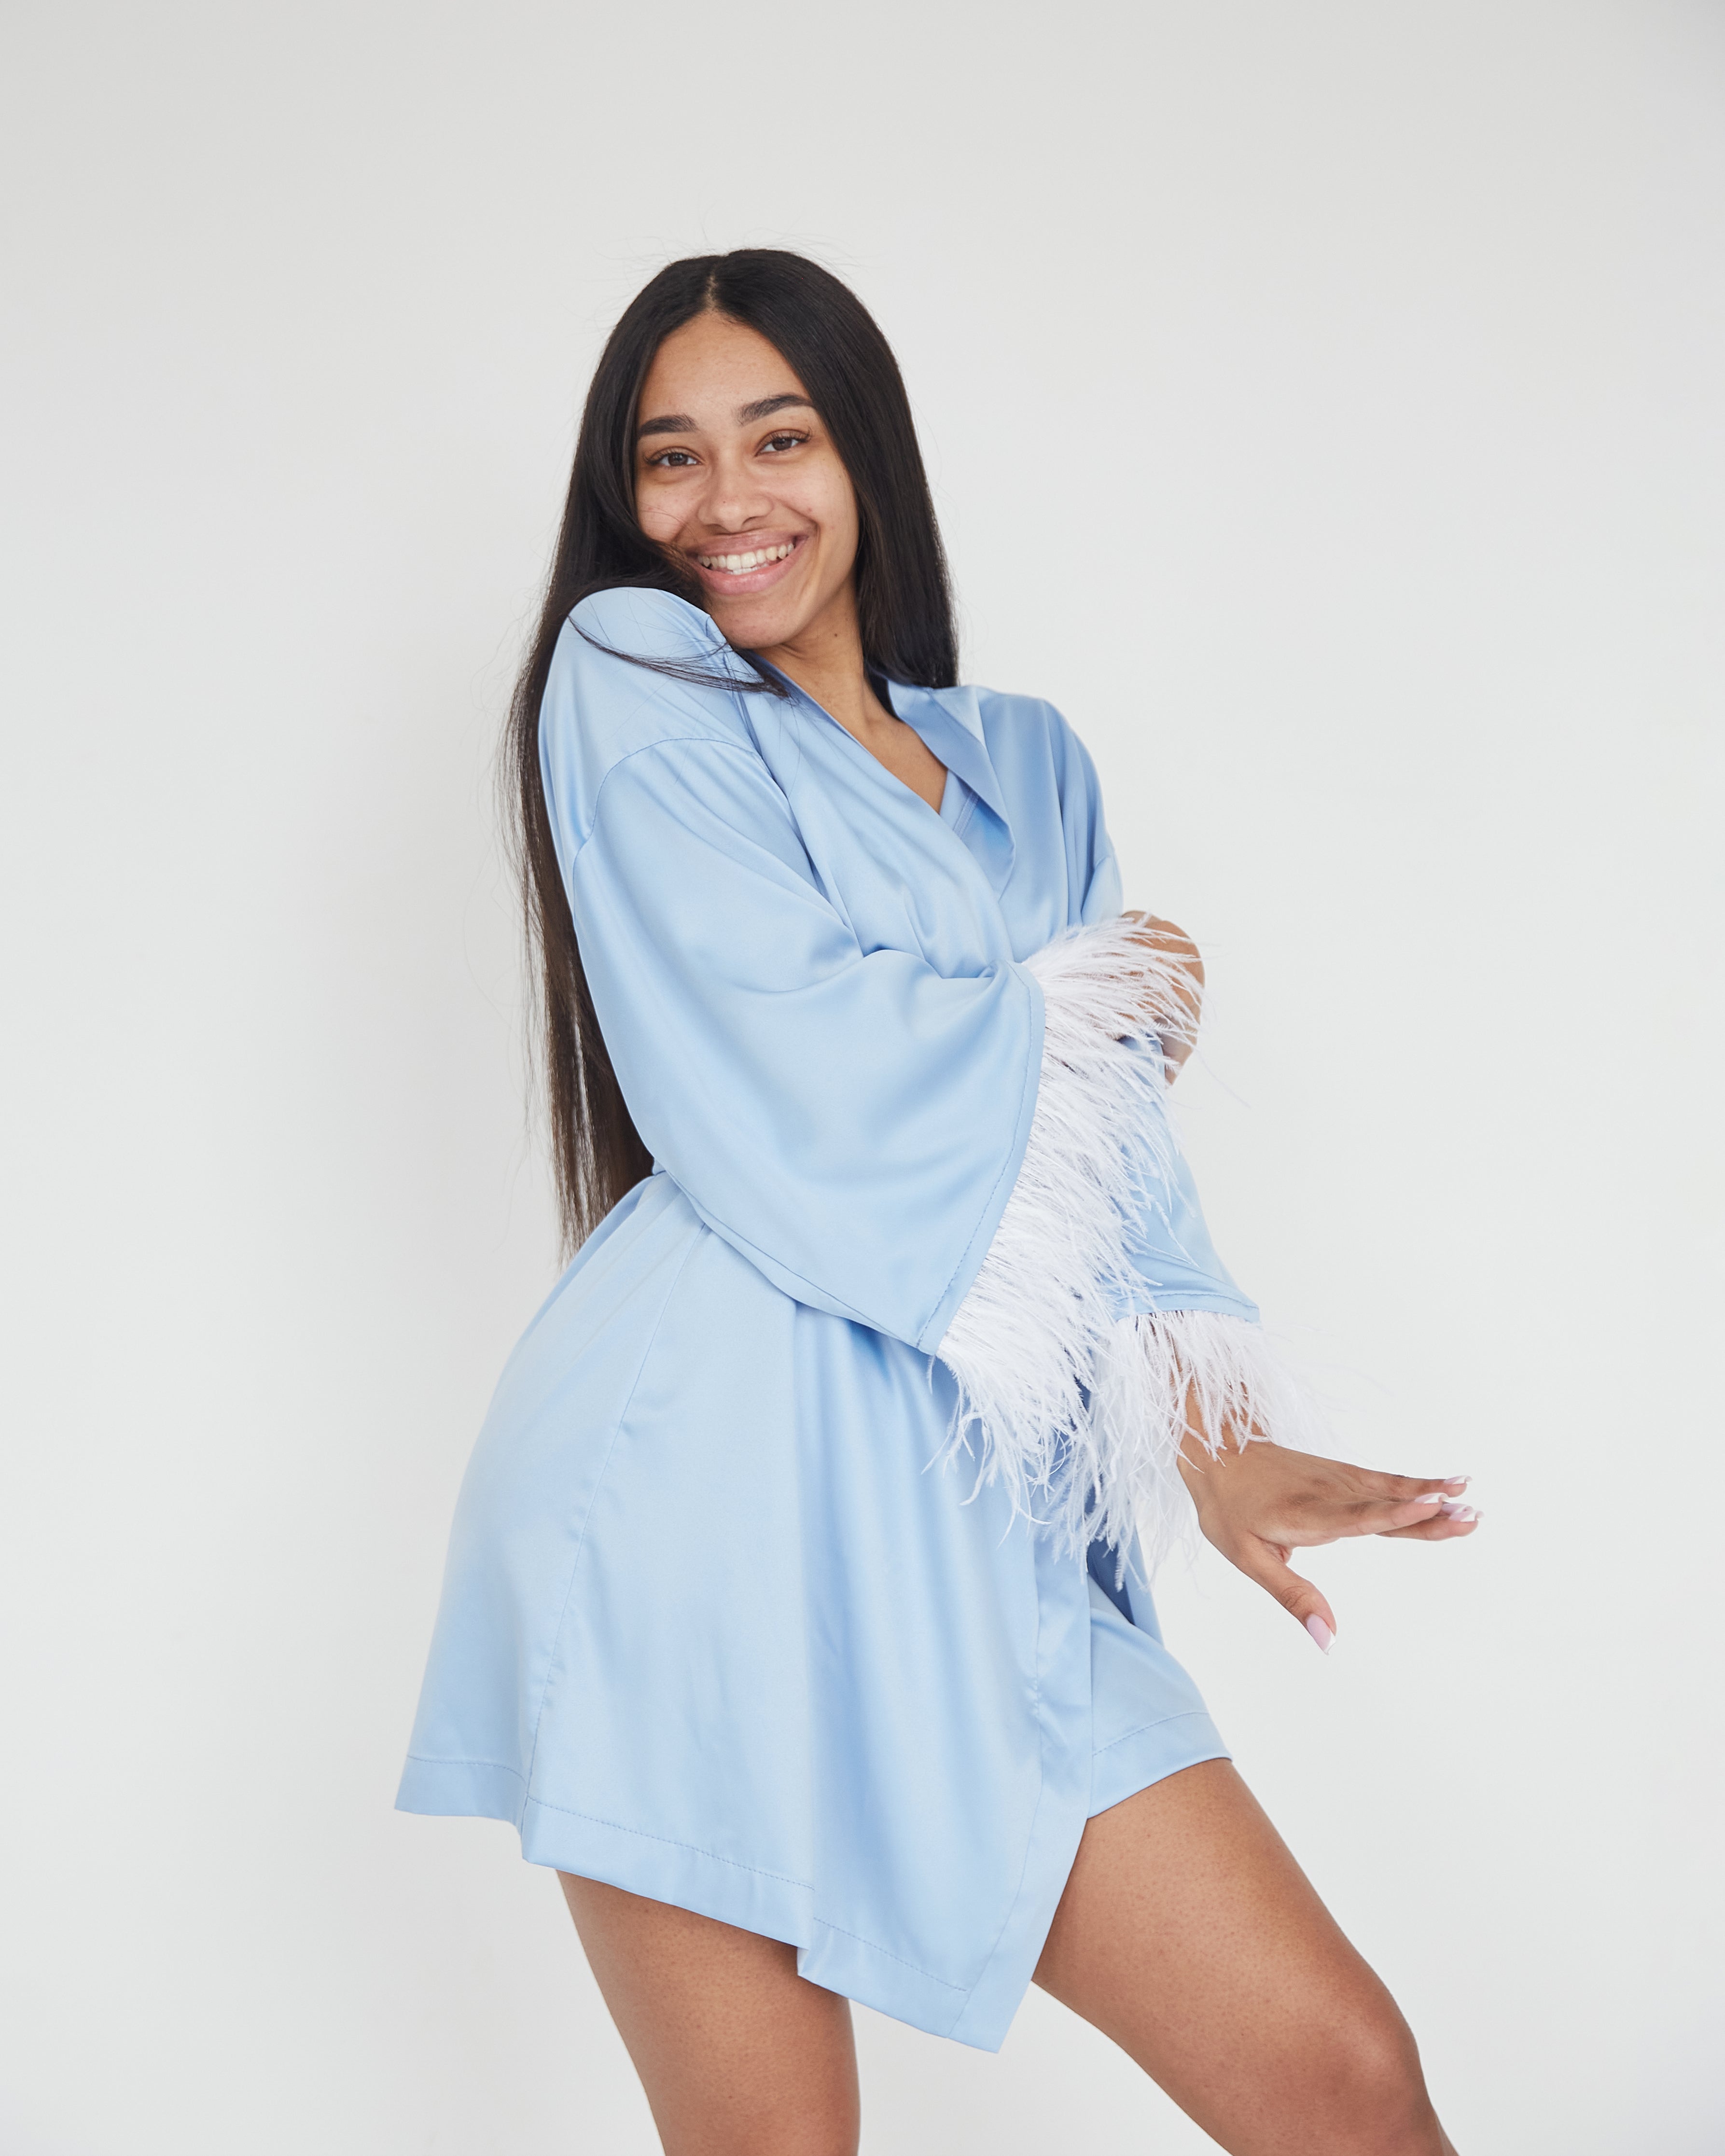 Silk light blue wedding day robe with feather for stylish bride and bridesmaids